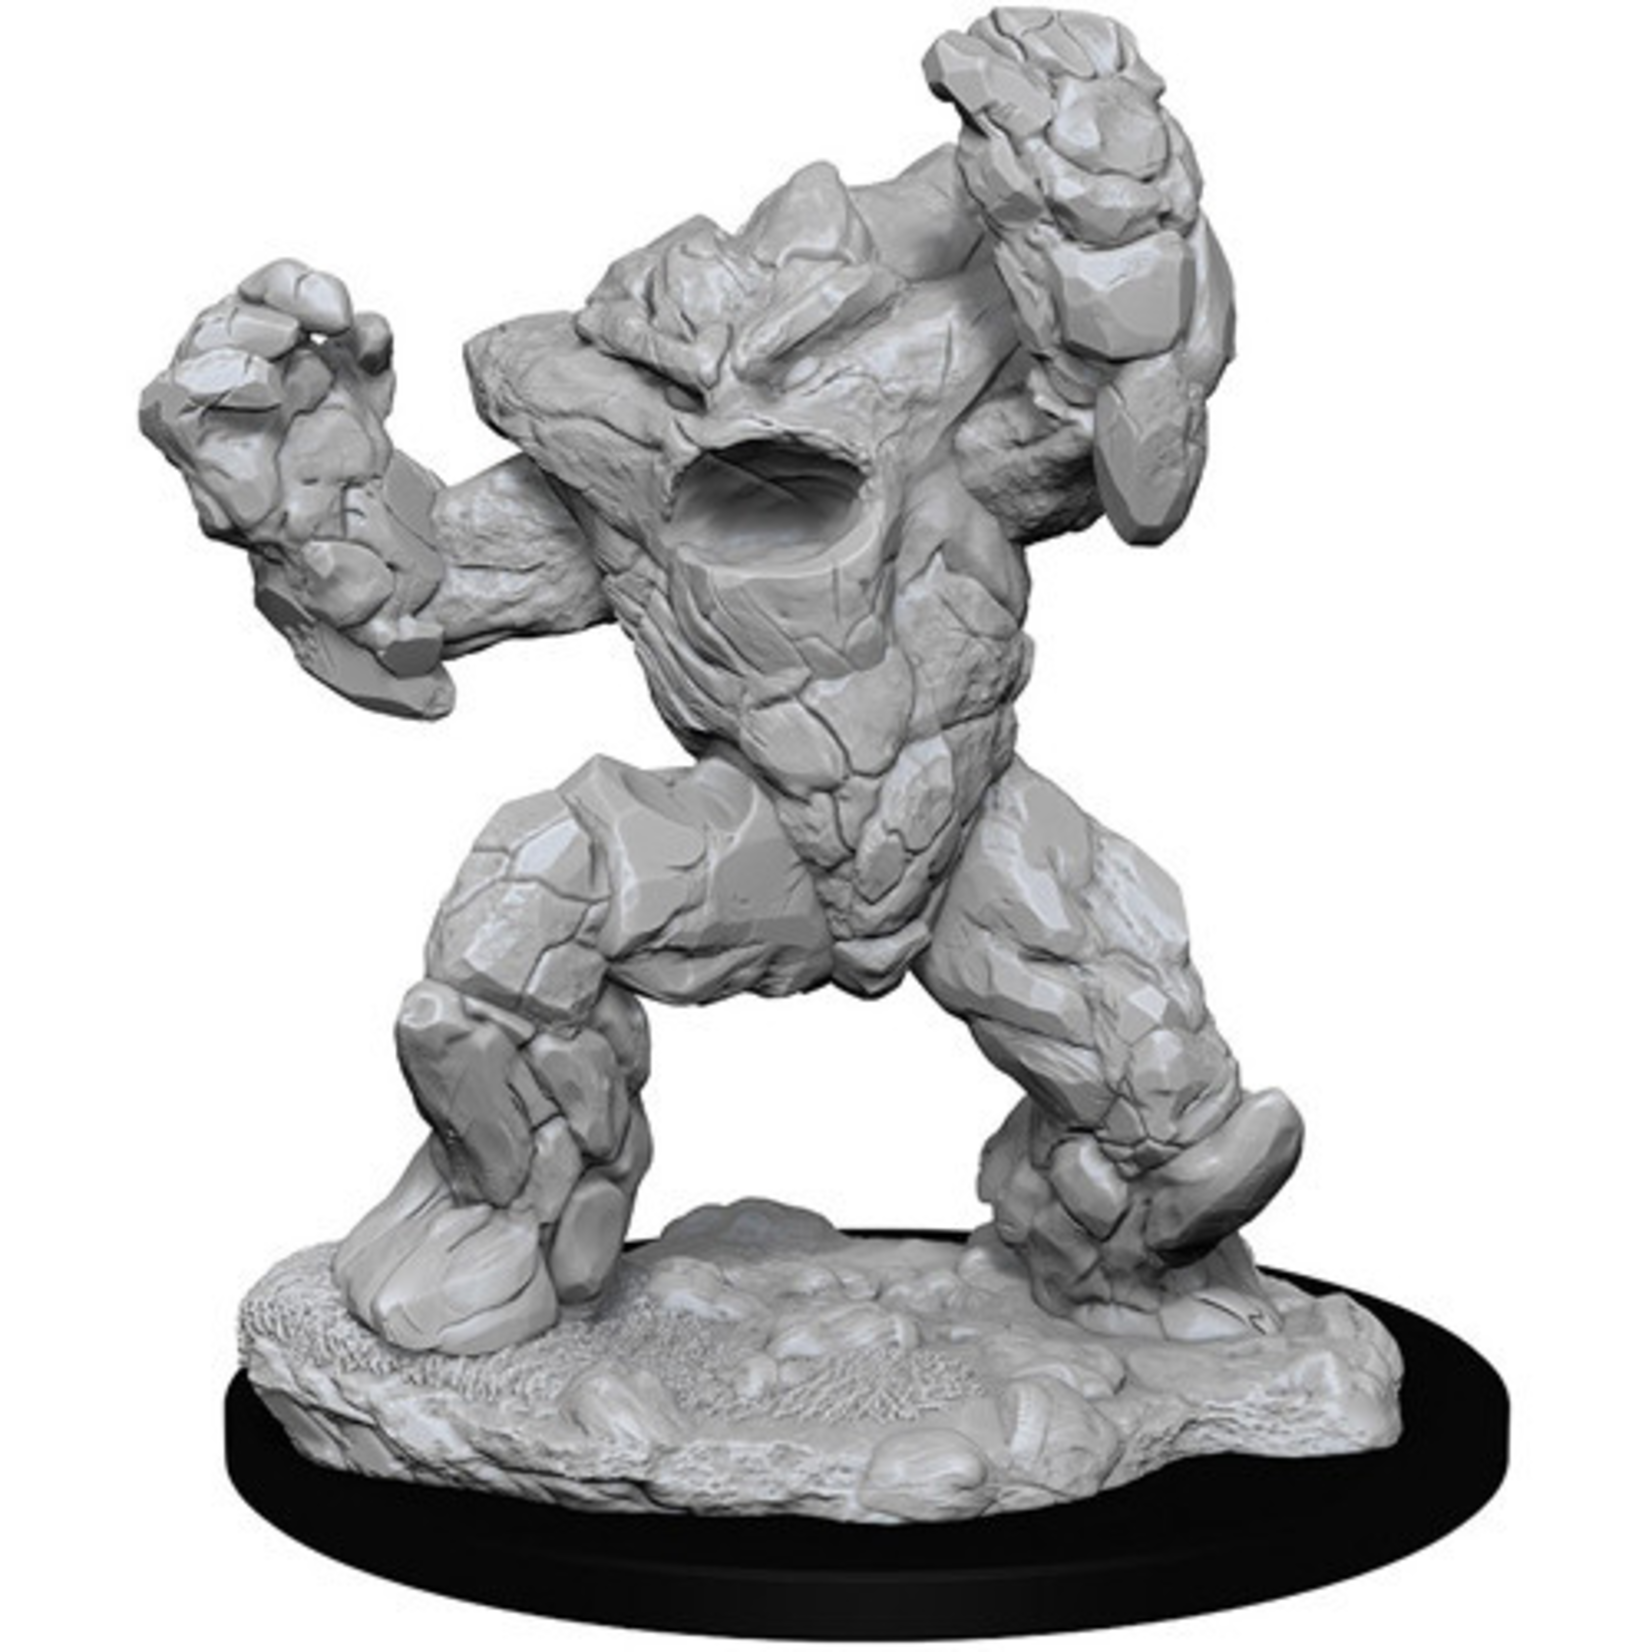 WizKids Dungeons and Dragons Nolzur's Marvelous Minis Earth Elemental